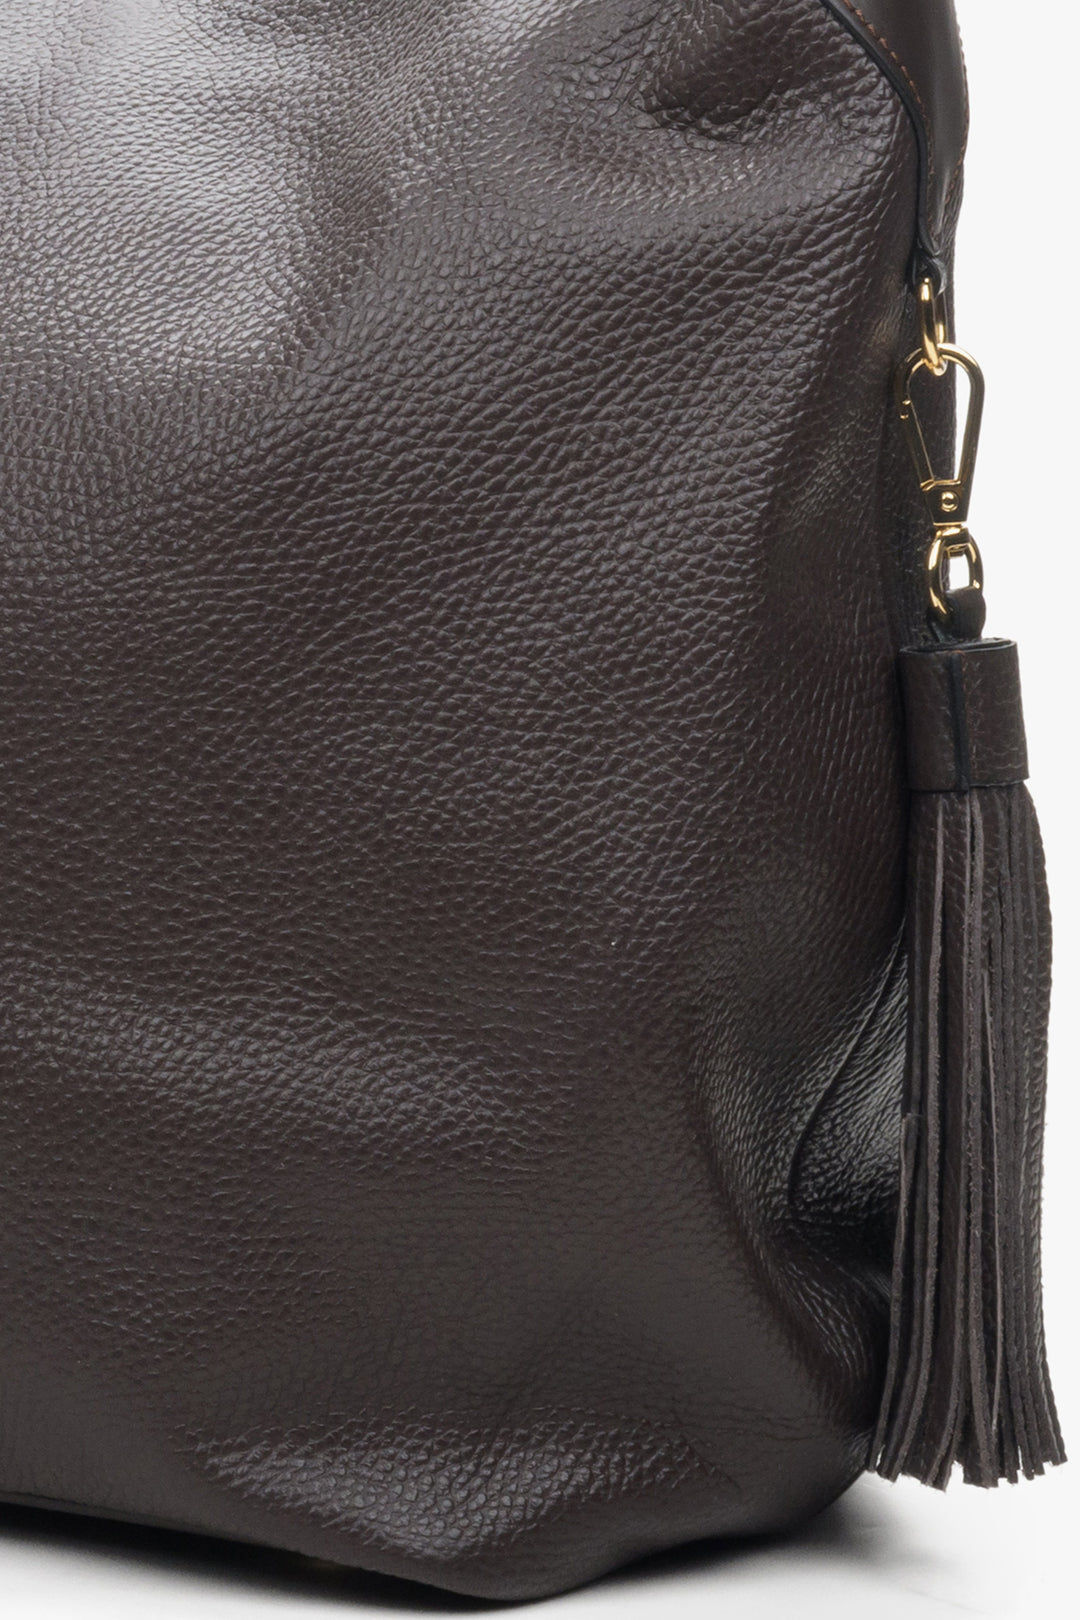 Women's dark brown bag by Estro in genuine leather - close-up on details.